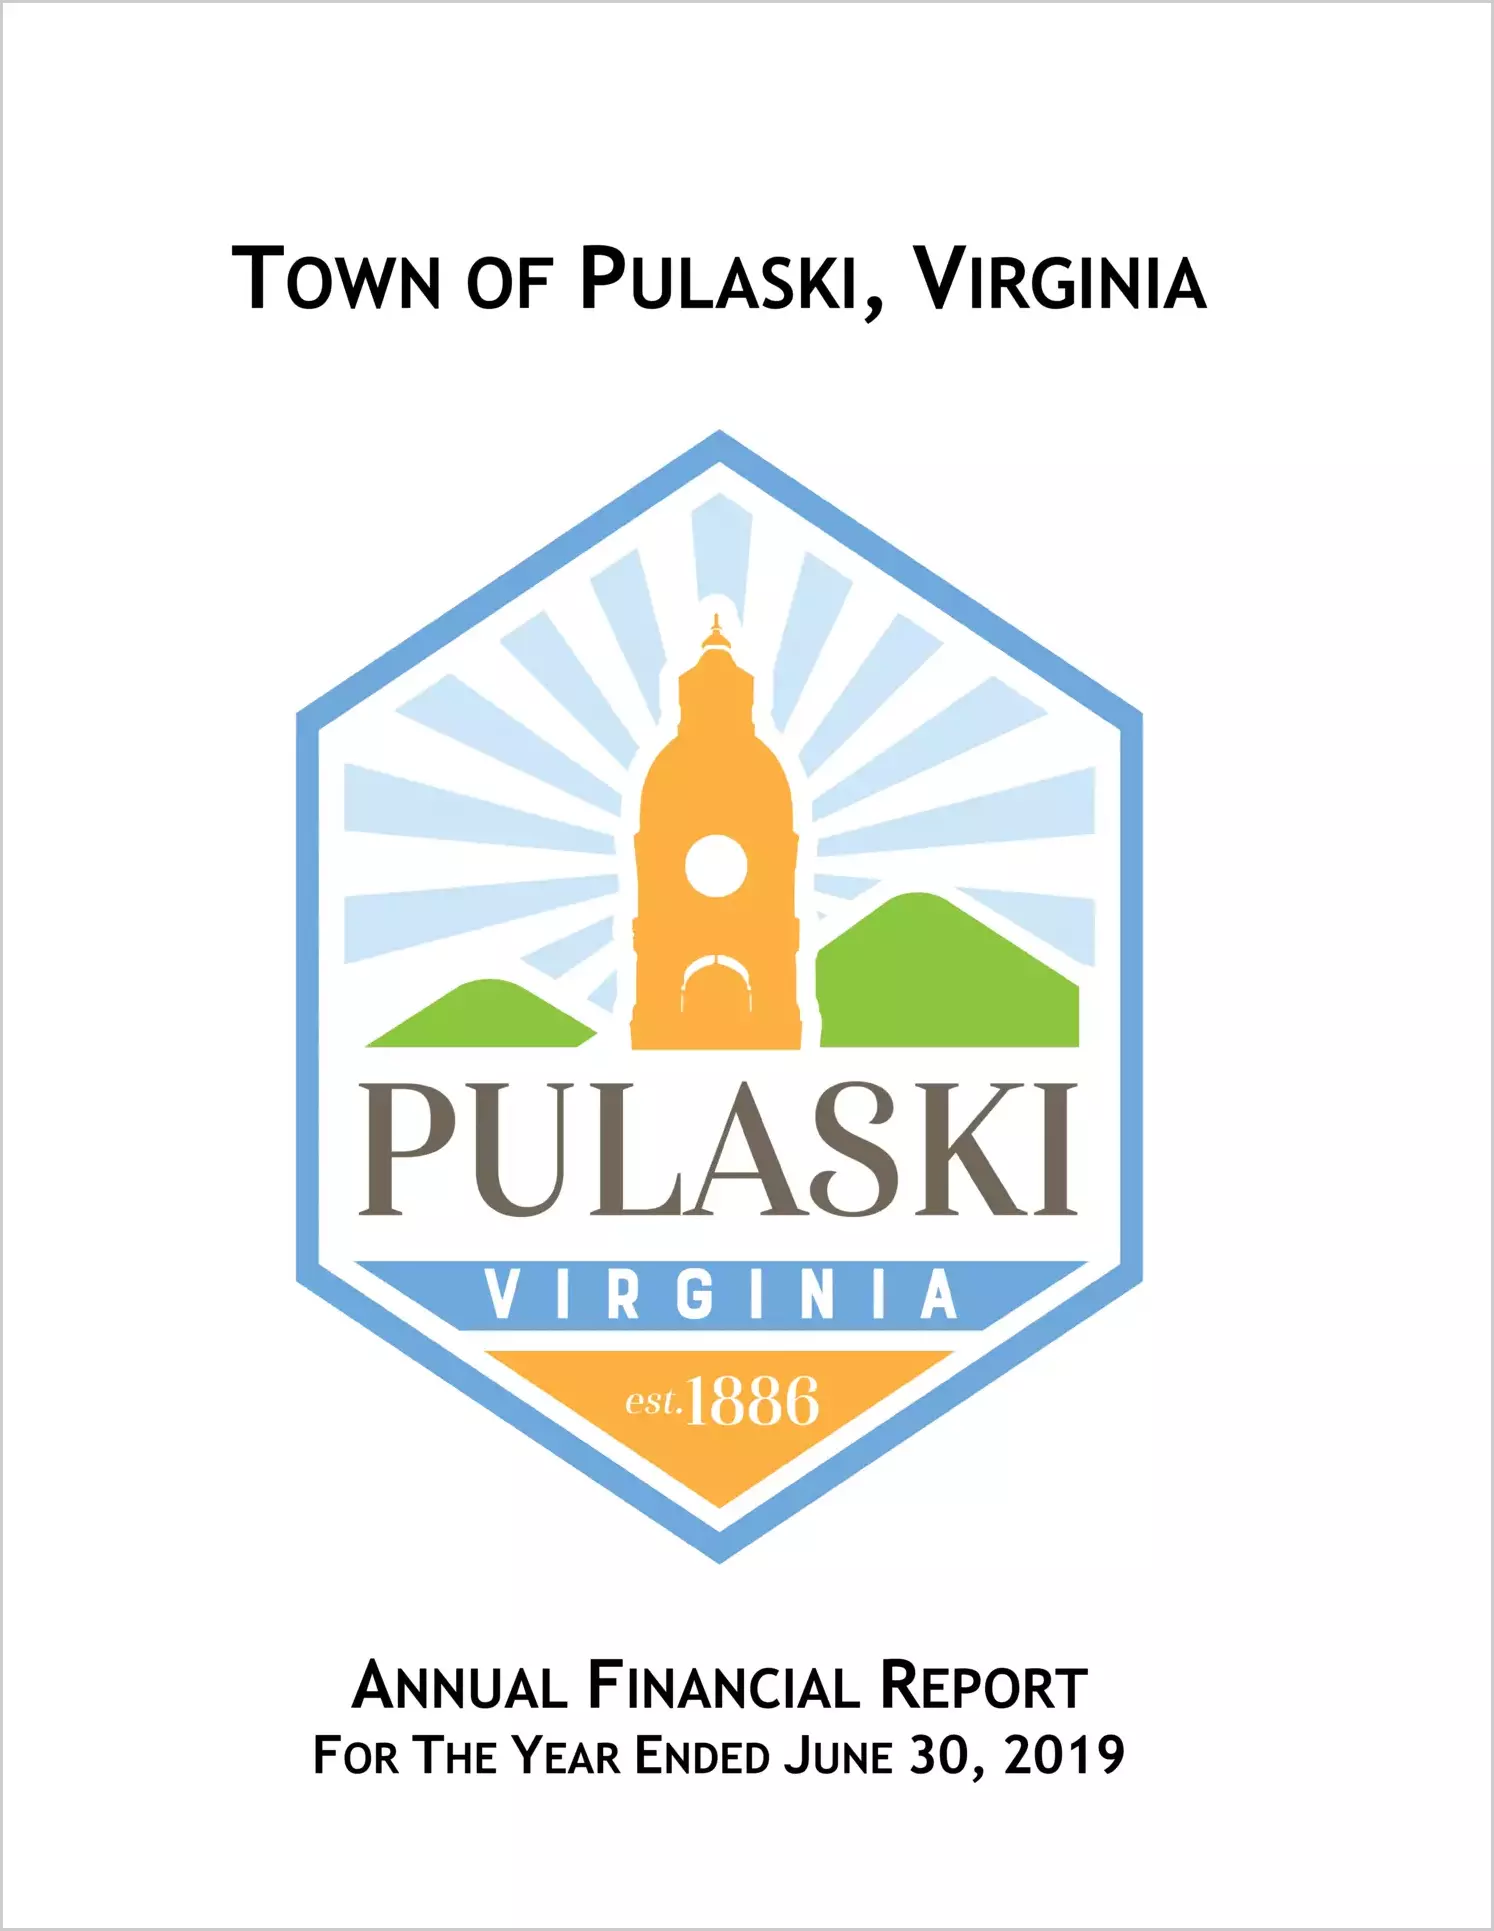 2019 Annual Financial Report for Town of Pulaski